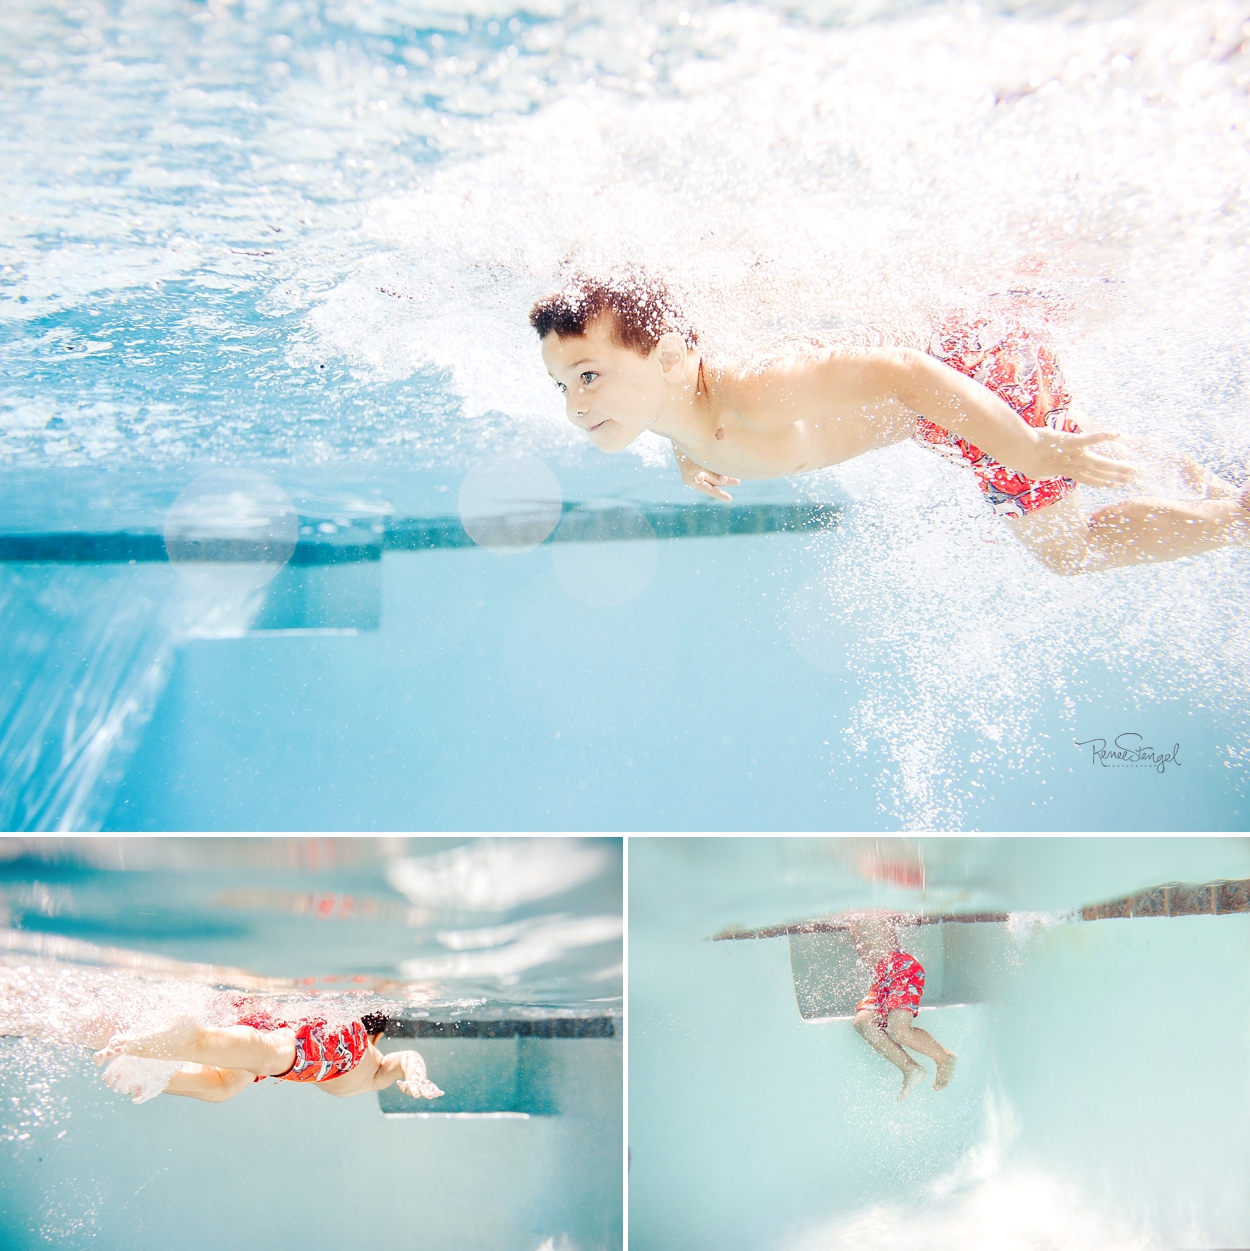 RENEE STENGEL Photography | Charlotte Portrait and Underwater Photographer | Underwater Swimmer | Pool Cannonball Splash and Bubbles